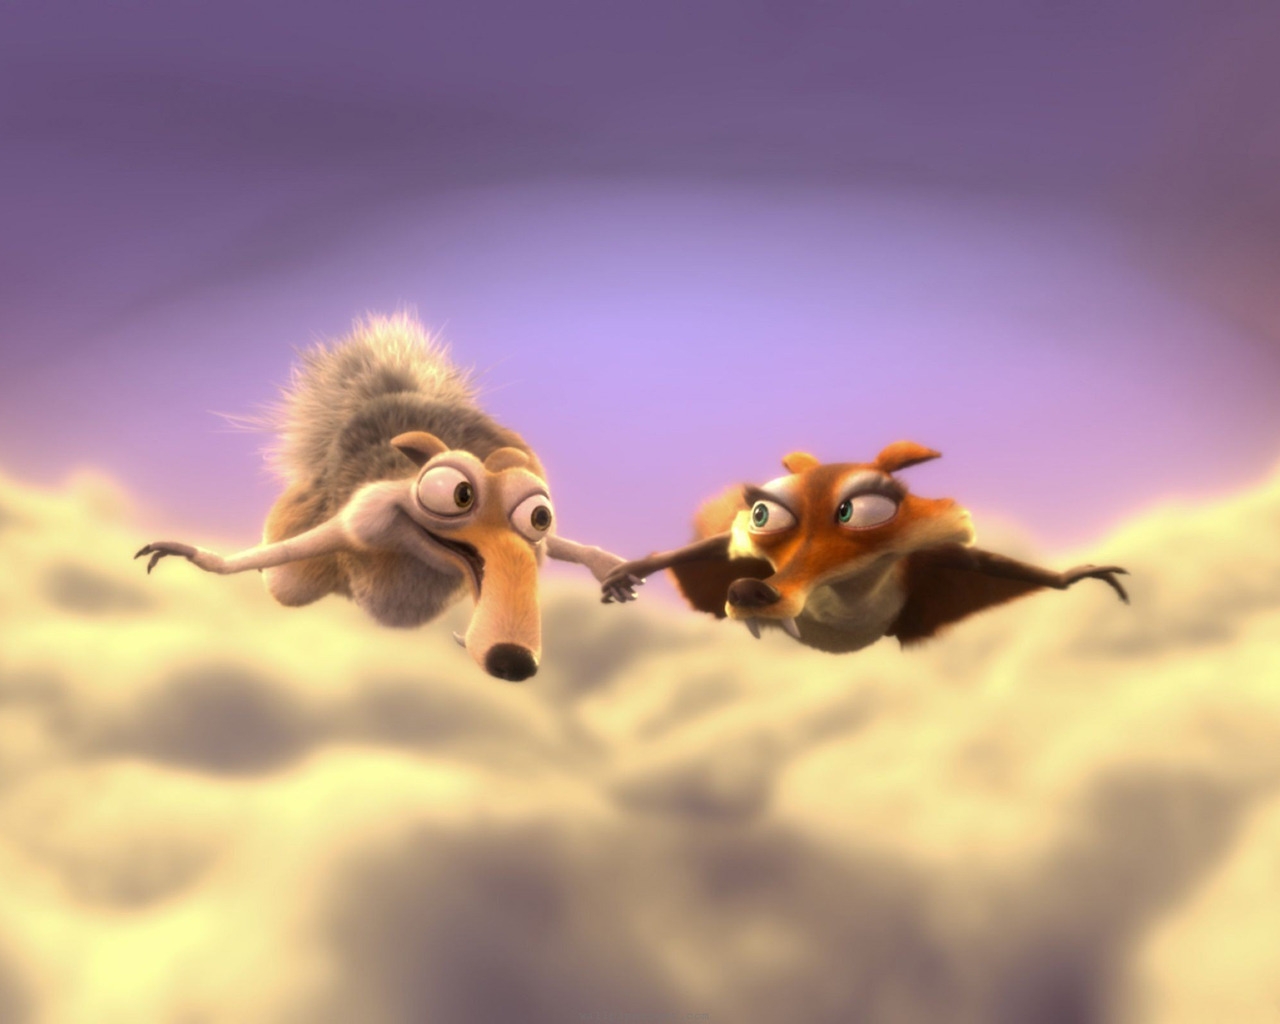 Scrat and Scratte for 1280 x 1024 resolution